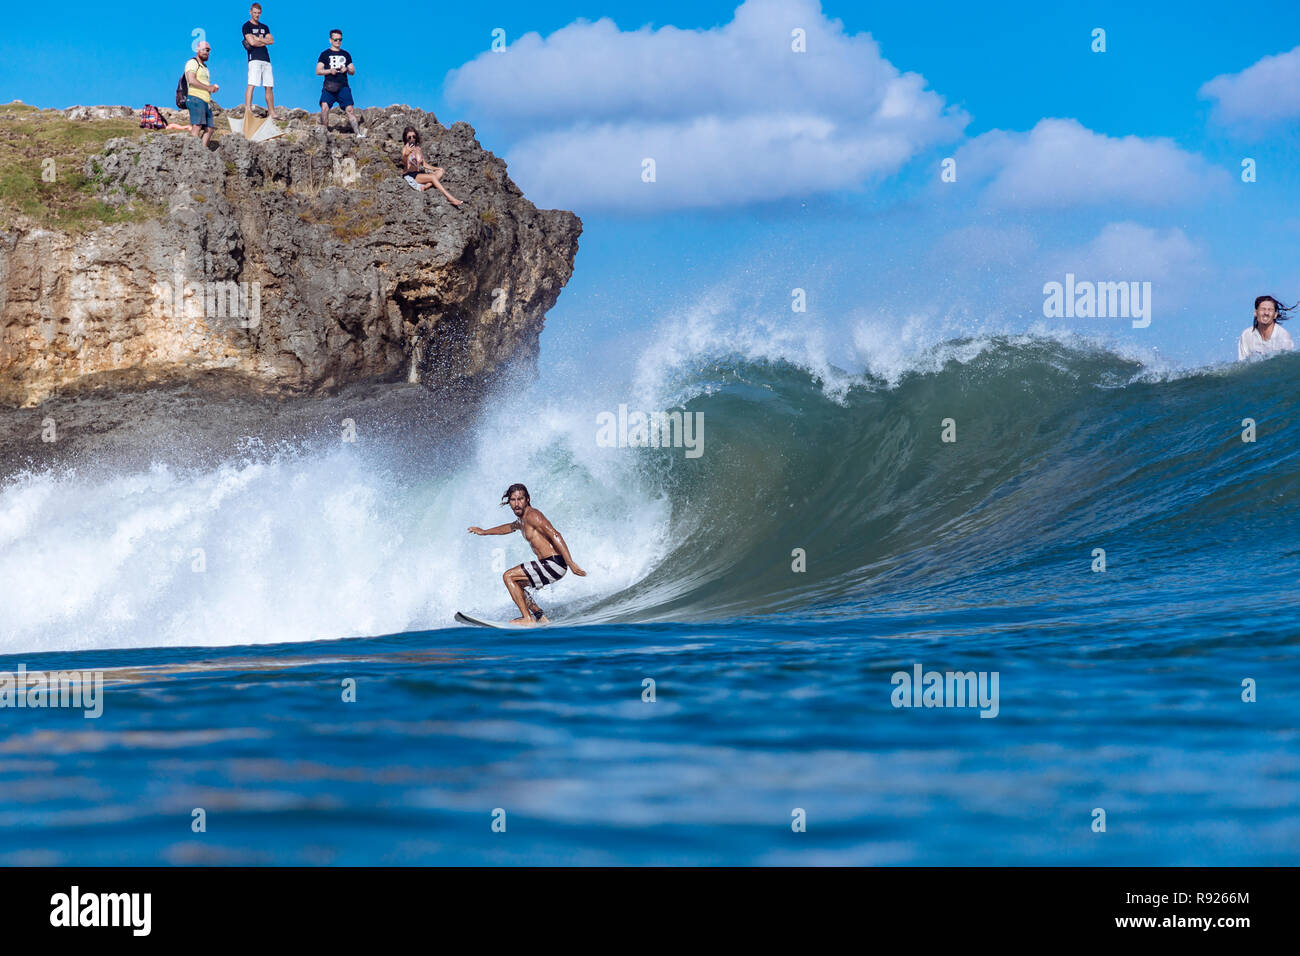 View of young male surfer riding wave in sea, Jimbaran, Bali, Indonesia Stock Photo